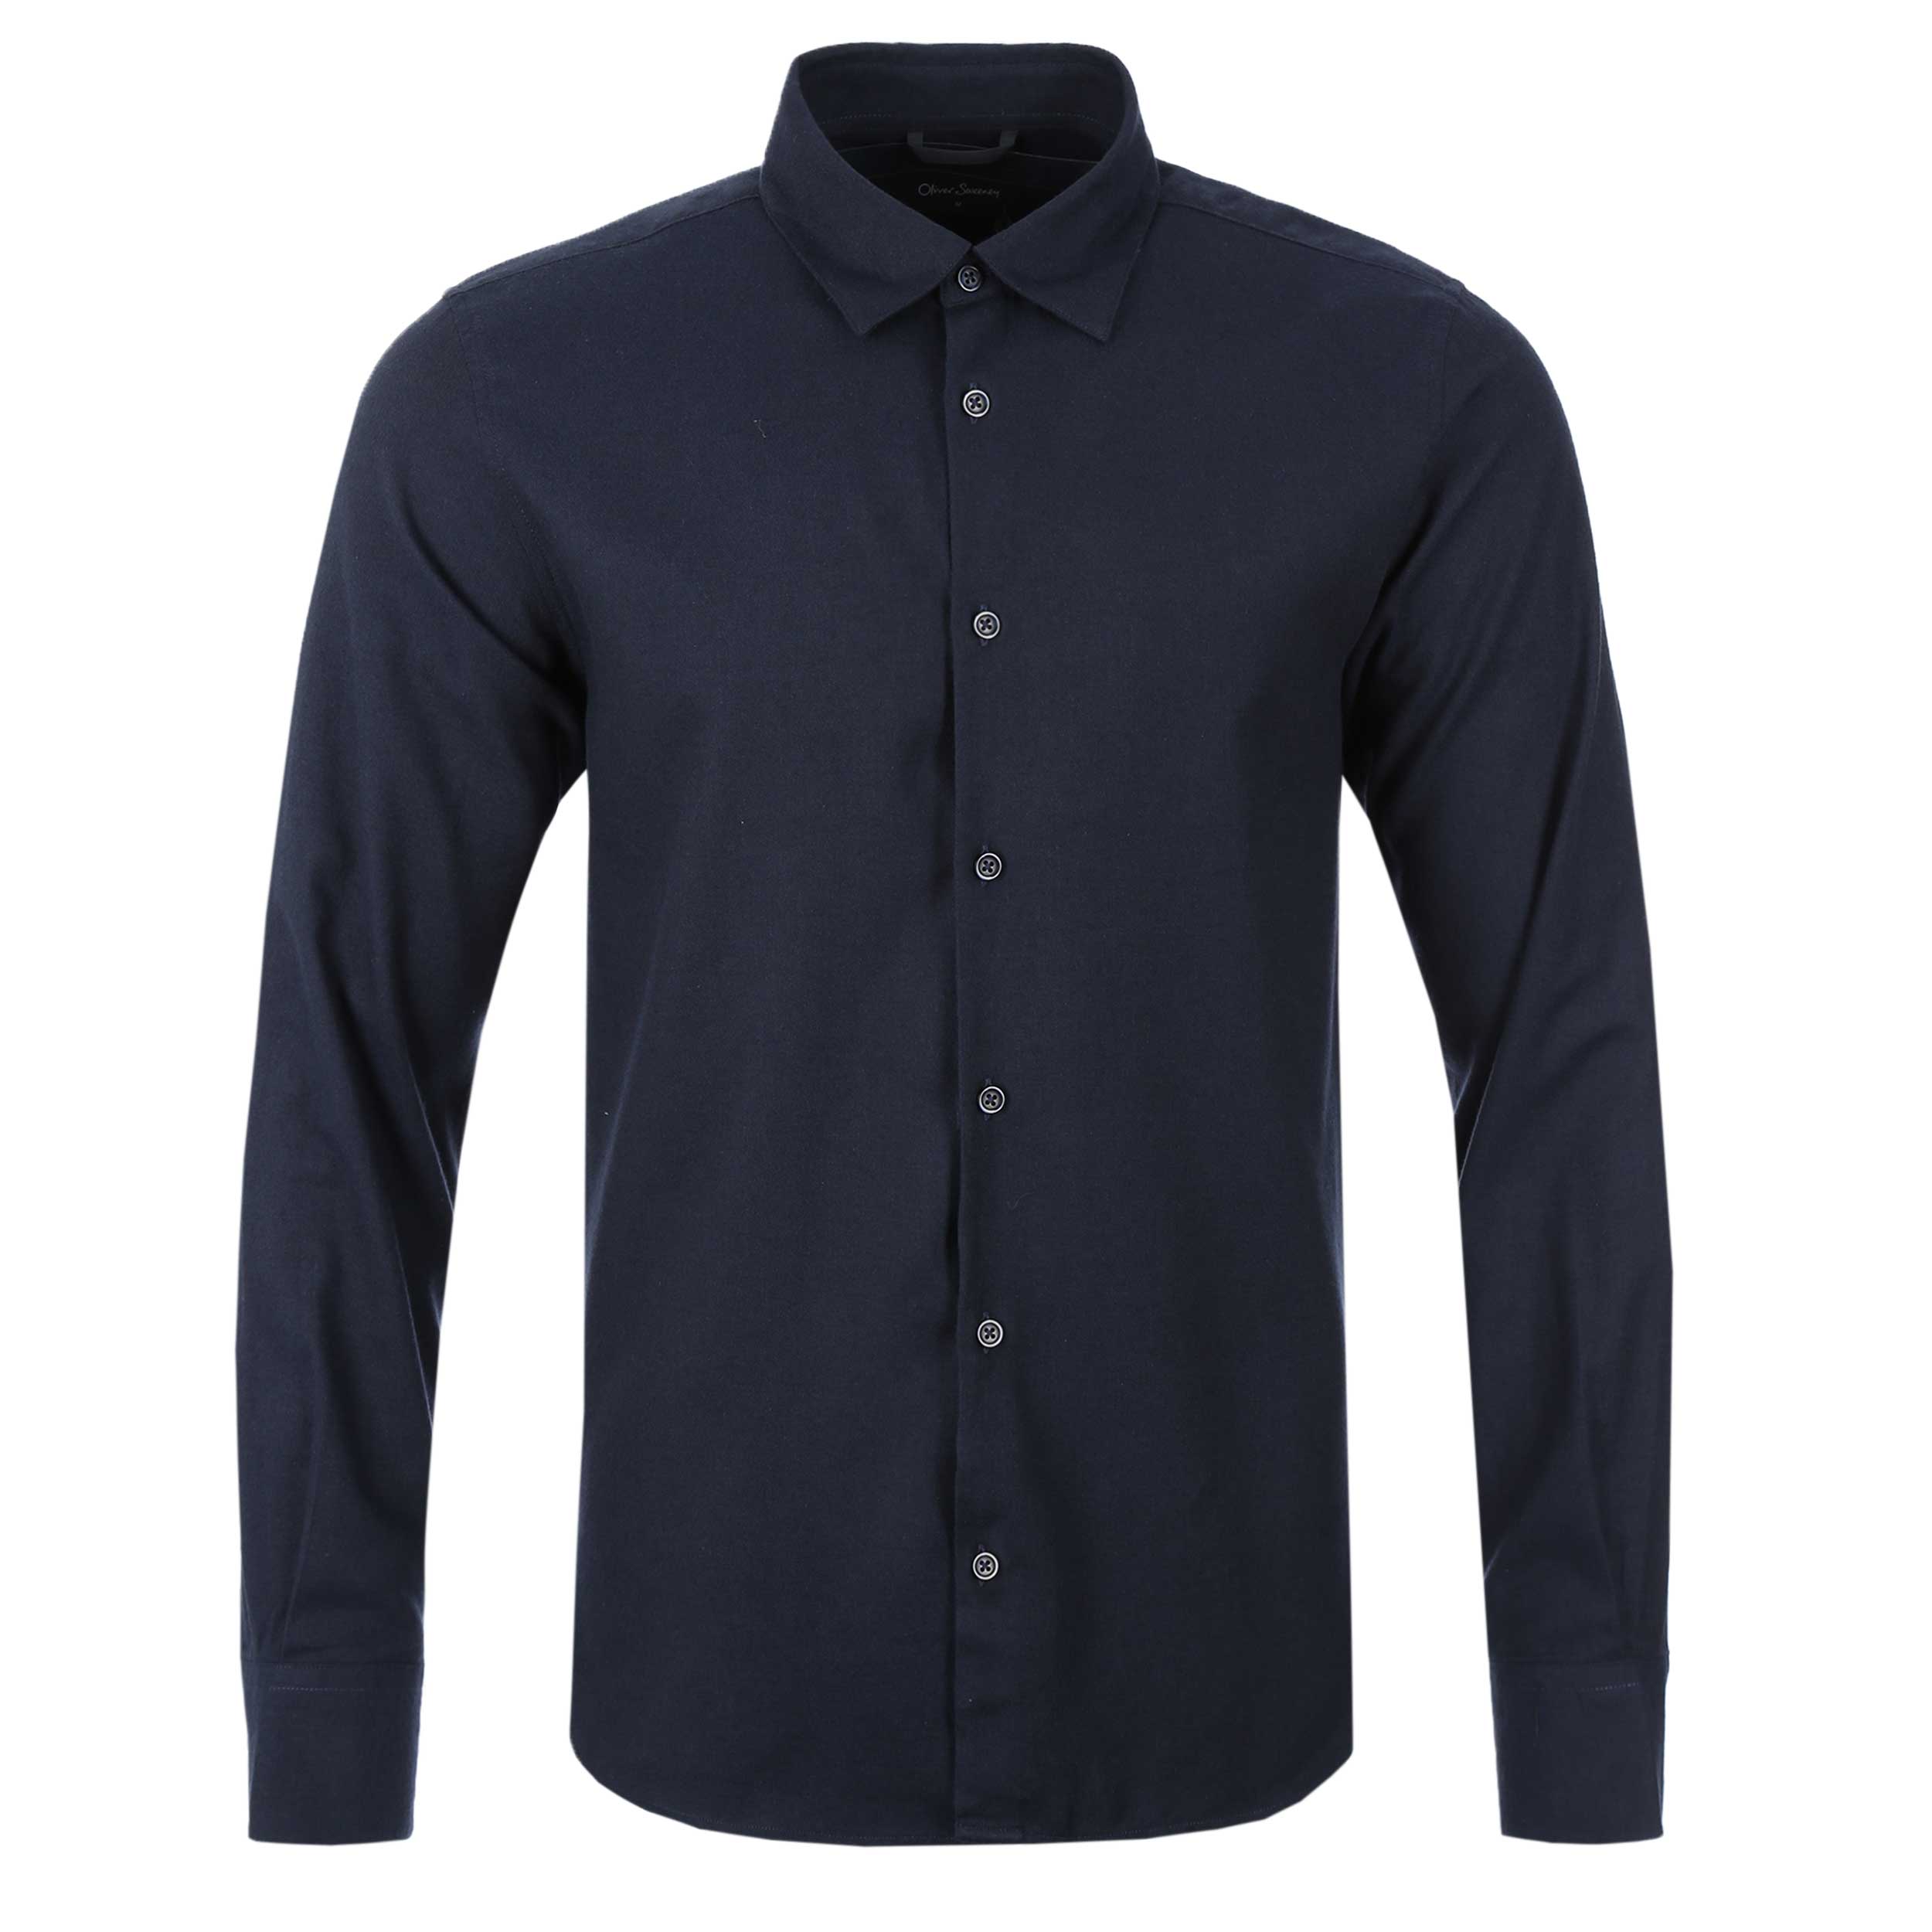 Oliver Sweeney Hawkesworth Shirt in Navy